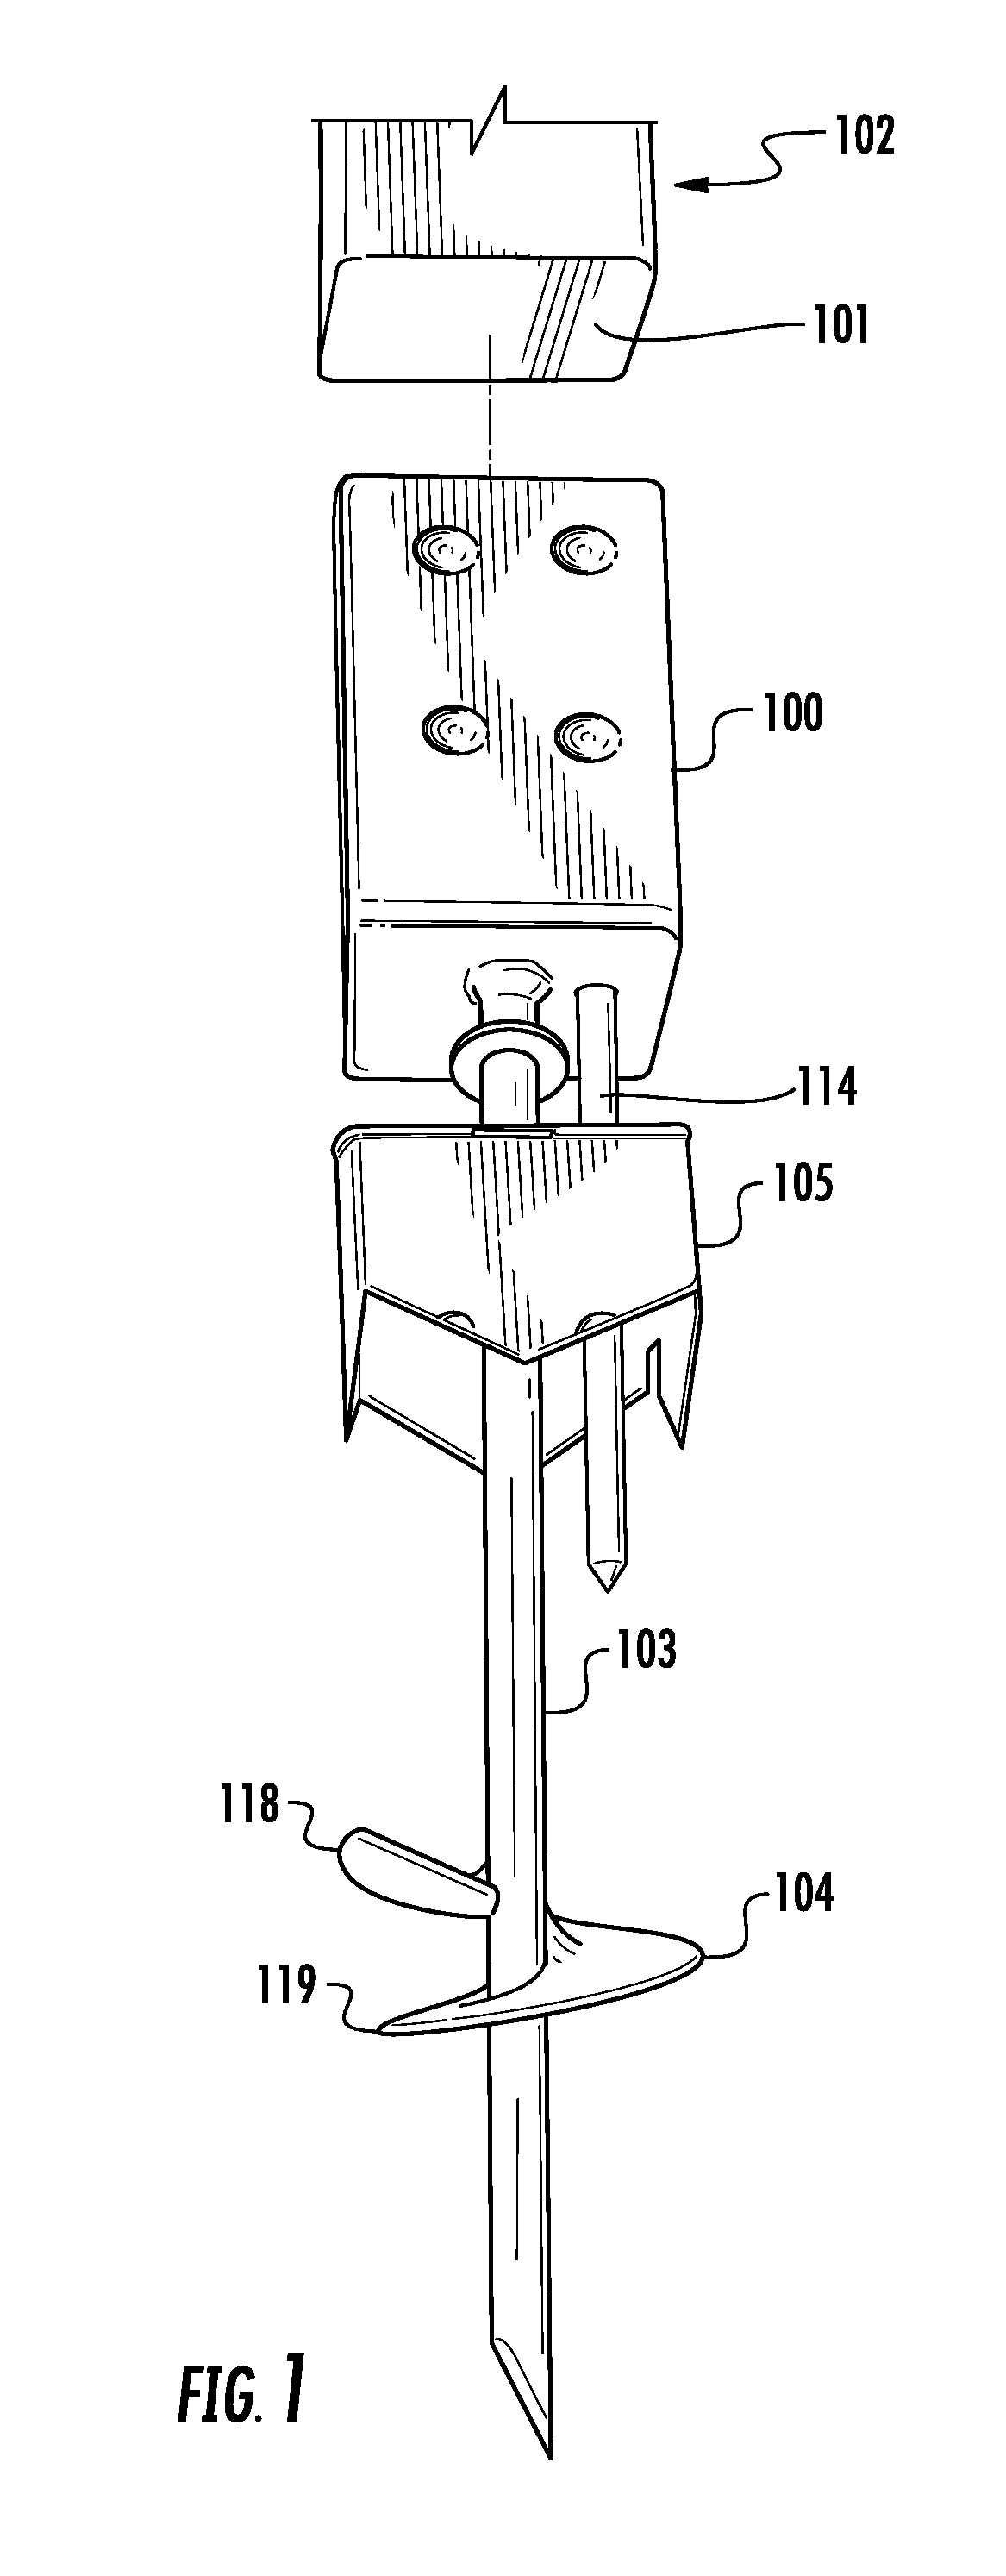 Post anchor apparatus and method of use